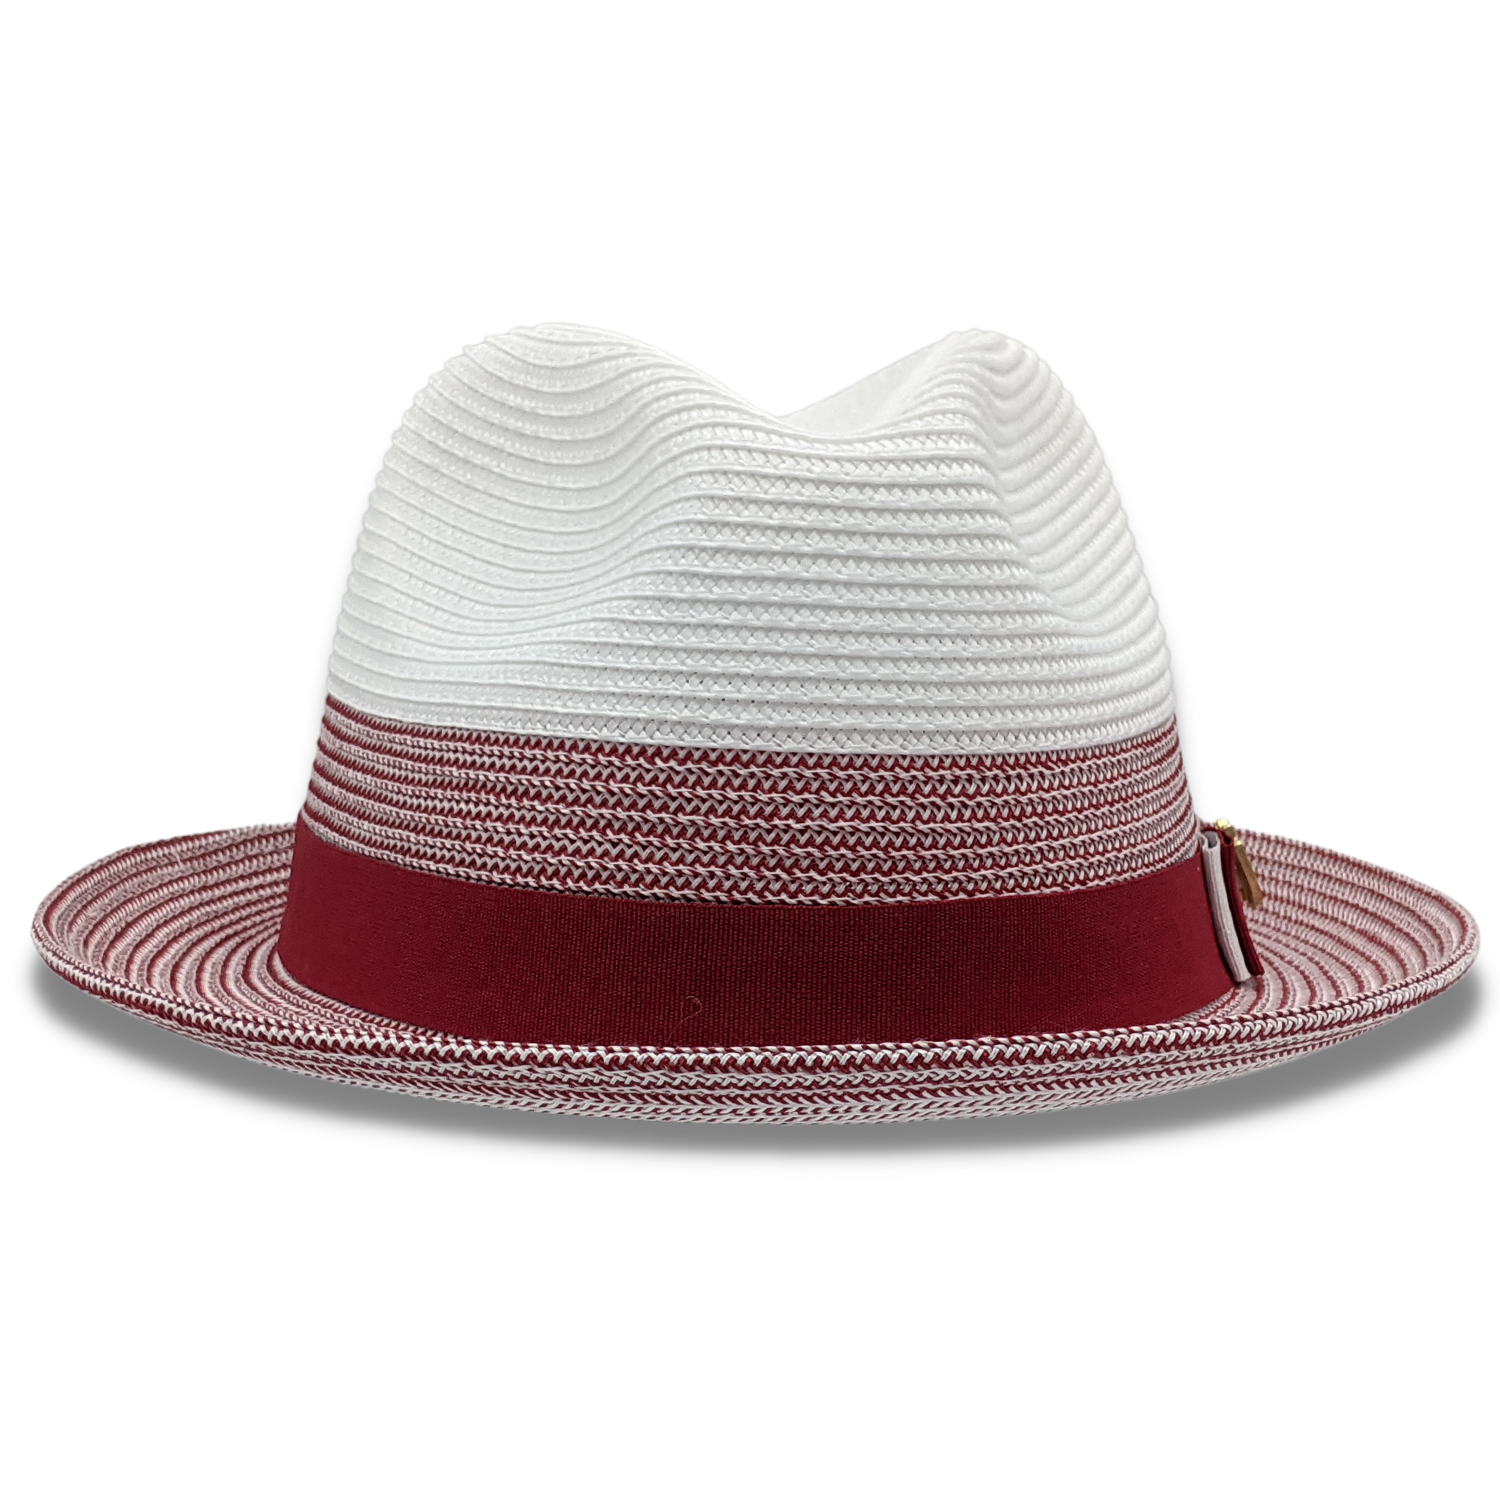 Two Tone Braided Stingy Brim Pinch Fedora Hat in Red H69 – Suits & More